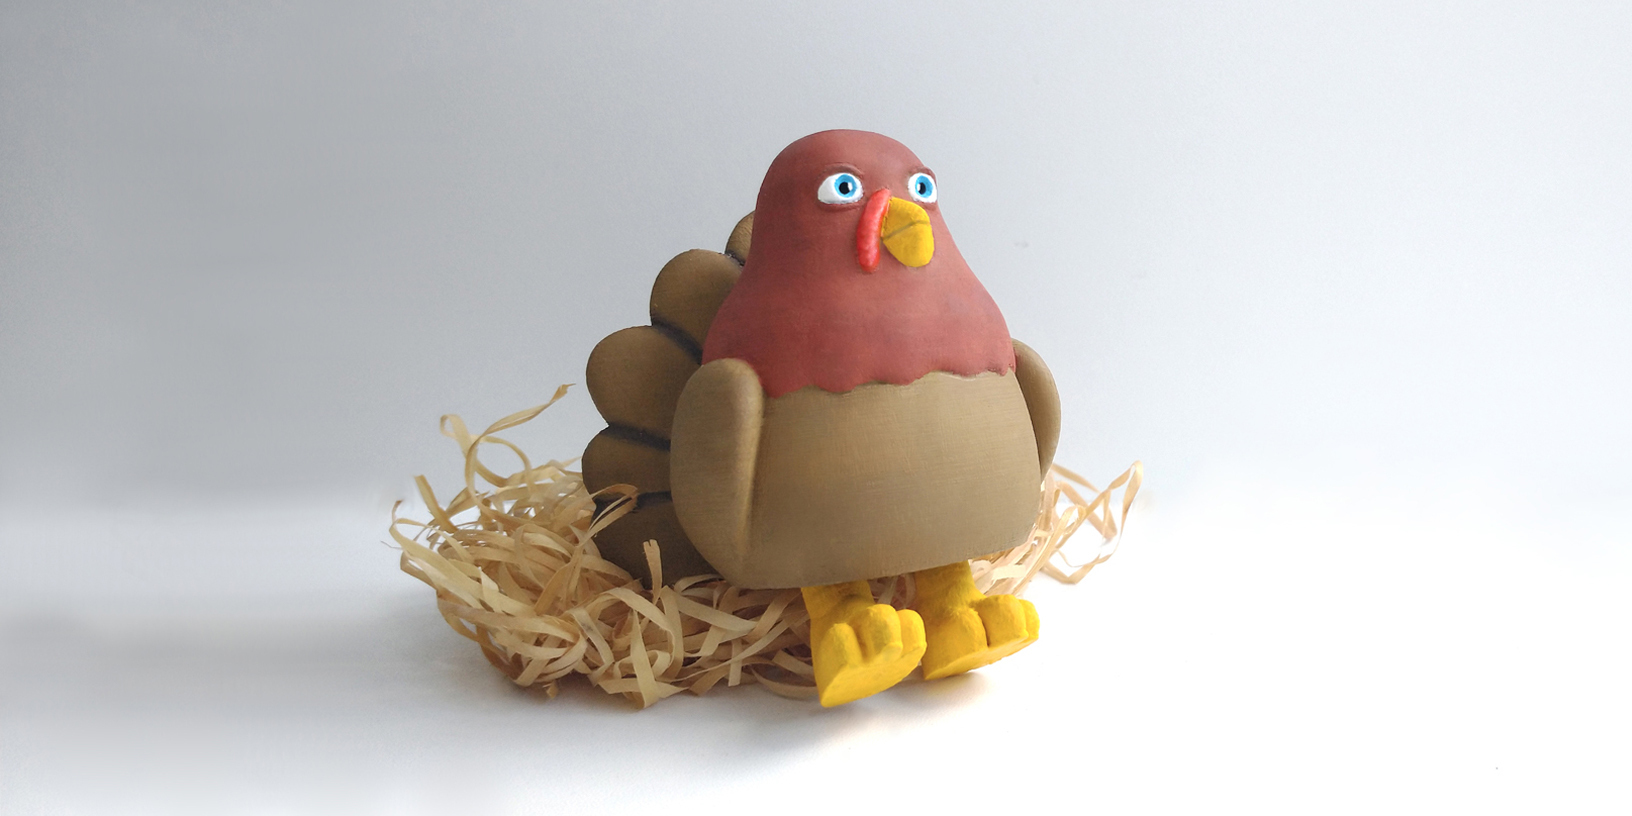 Find here a selection of the best 3D models of creations related Thanksgiving 3D printable